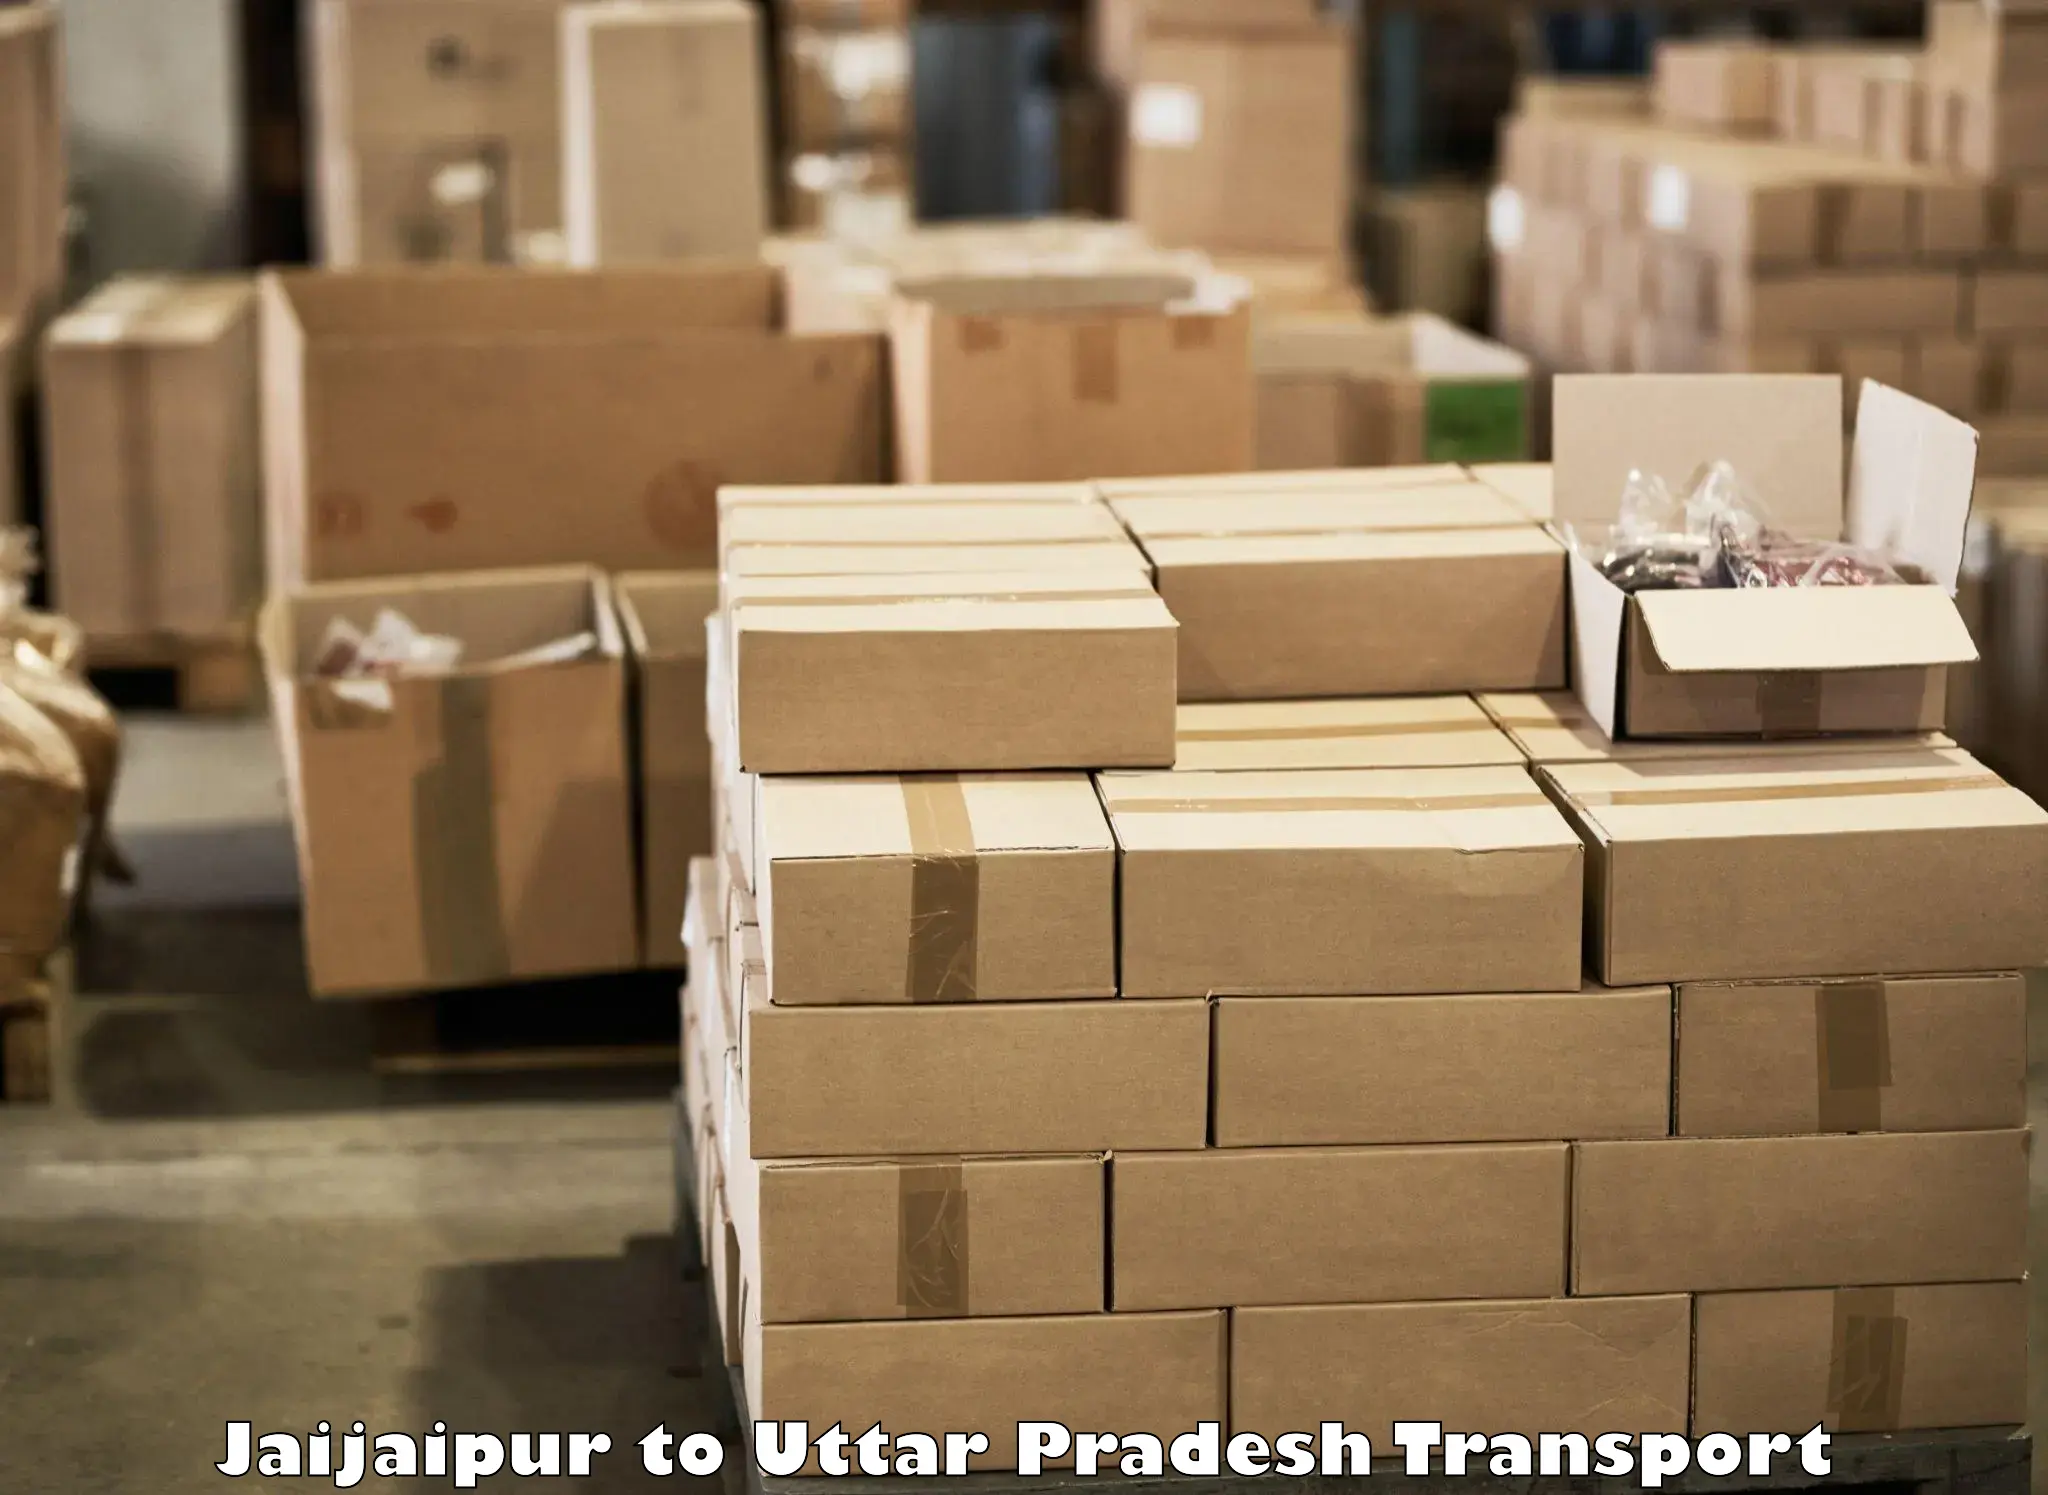 Road transport online services Jaijaipur to Lucknow